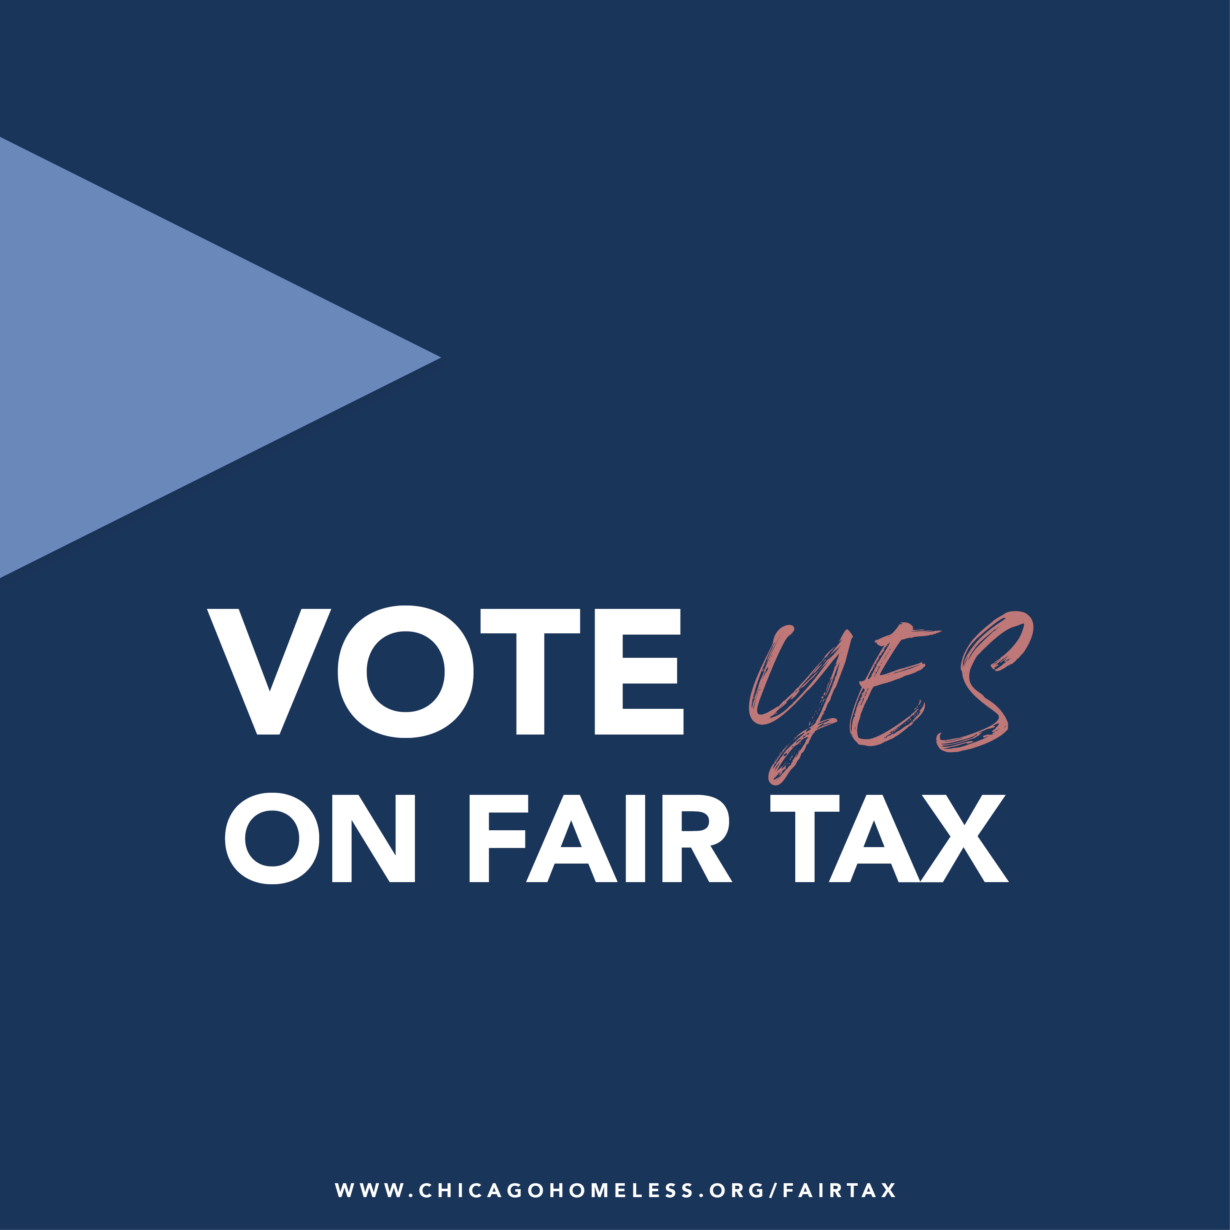 Vote YES on the Fair Tax Chicago Coalition for the Homeless